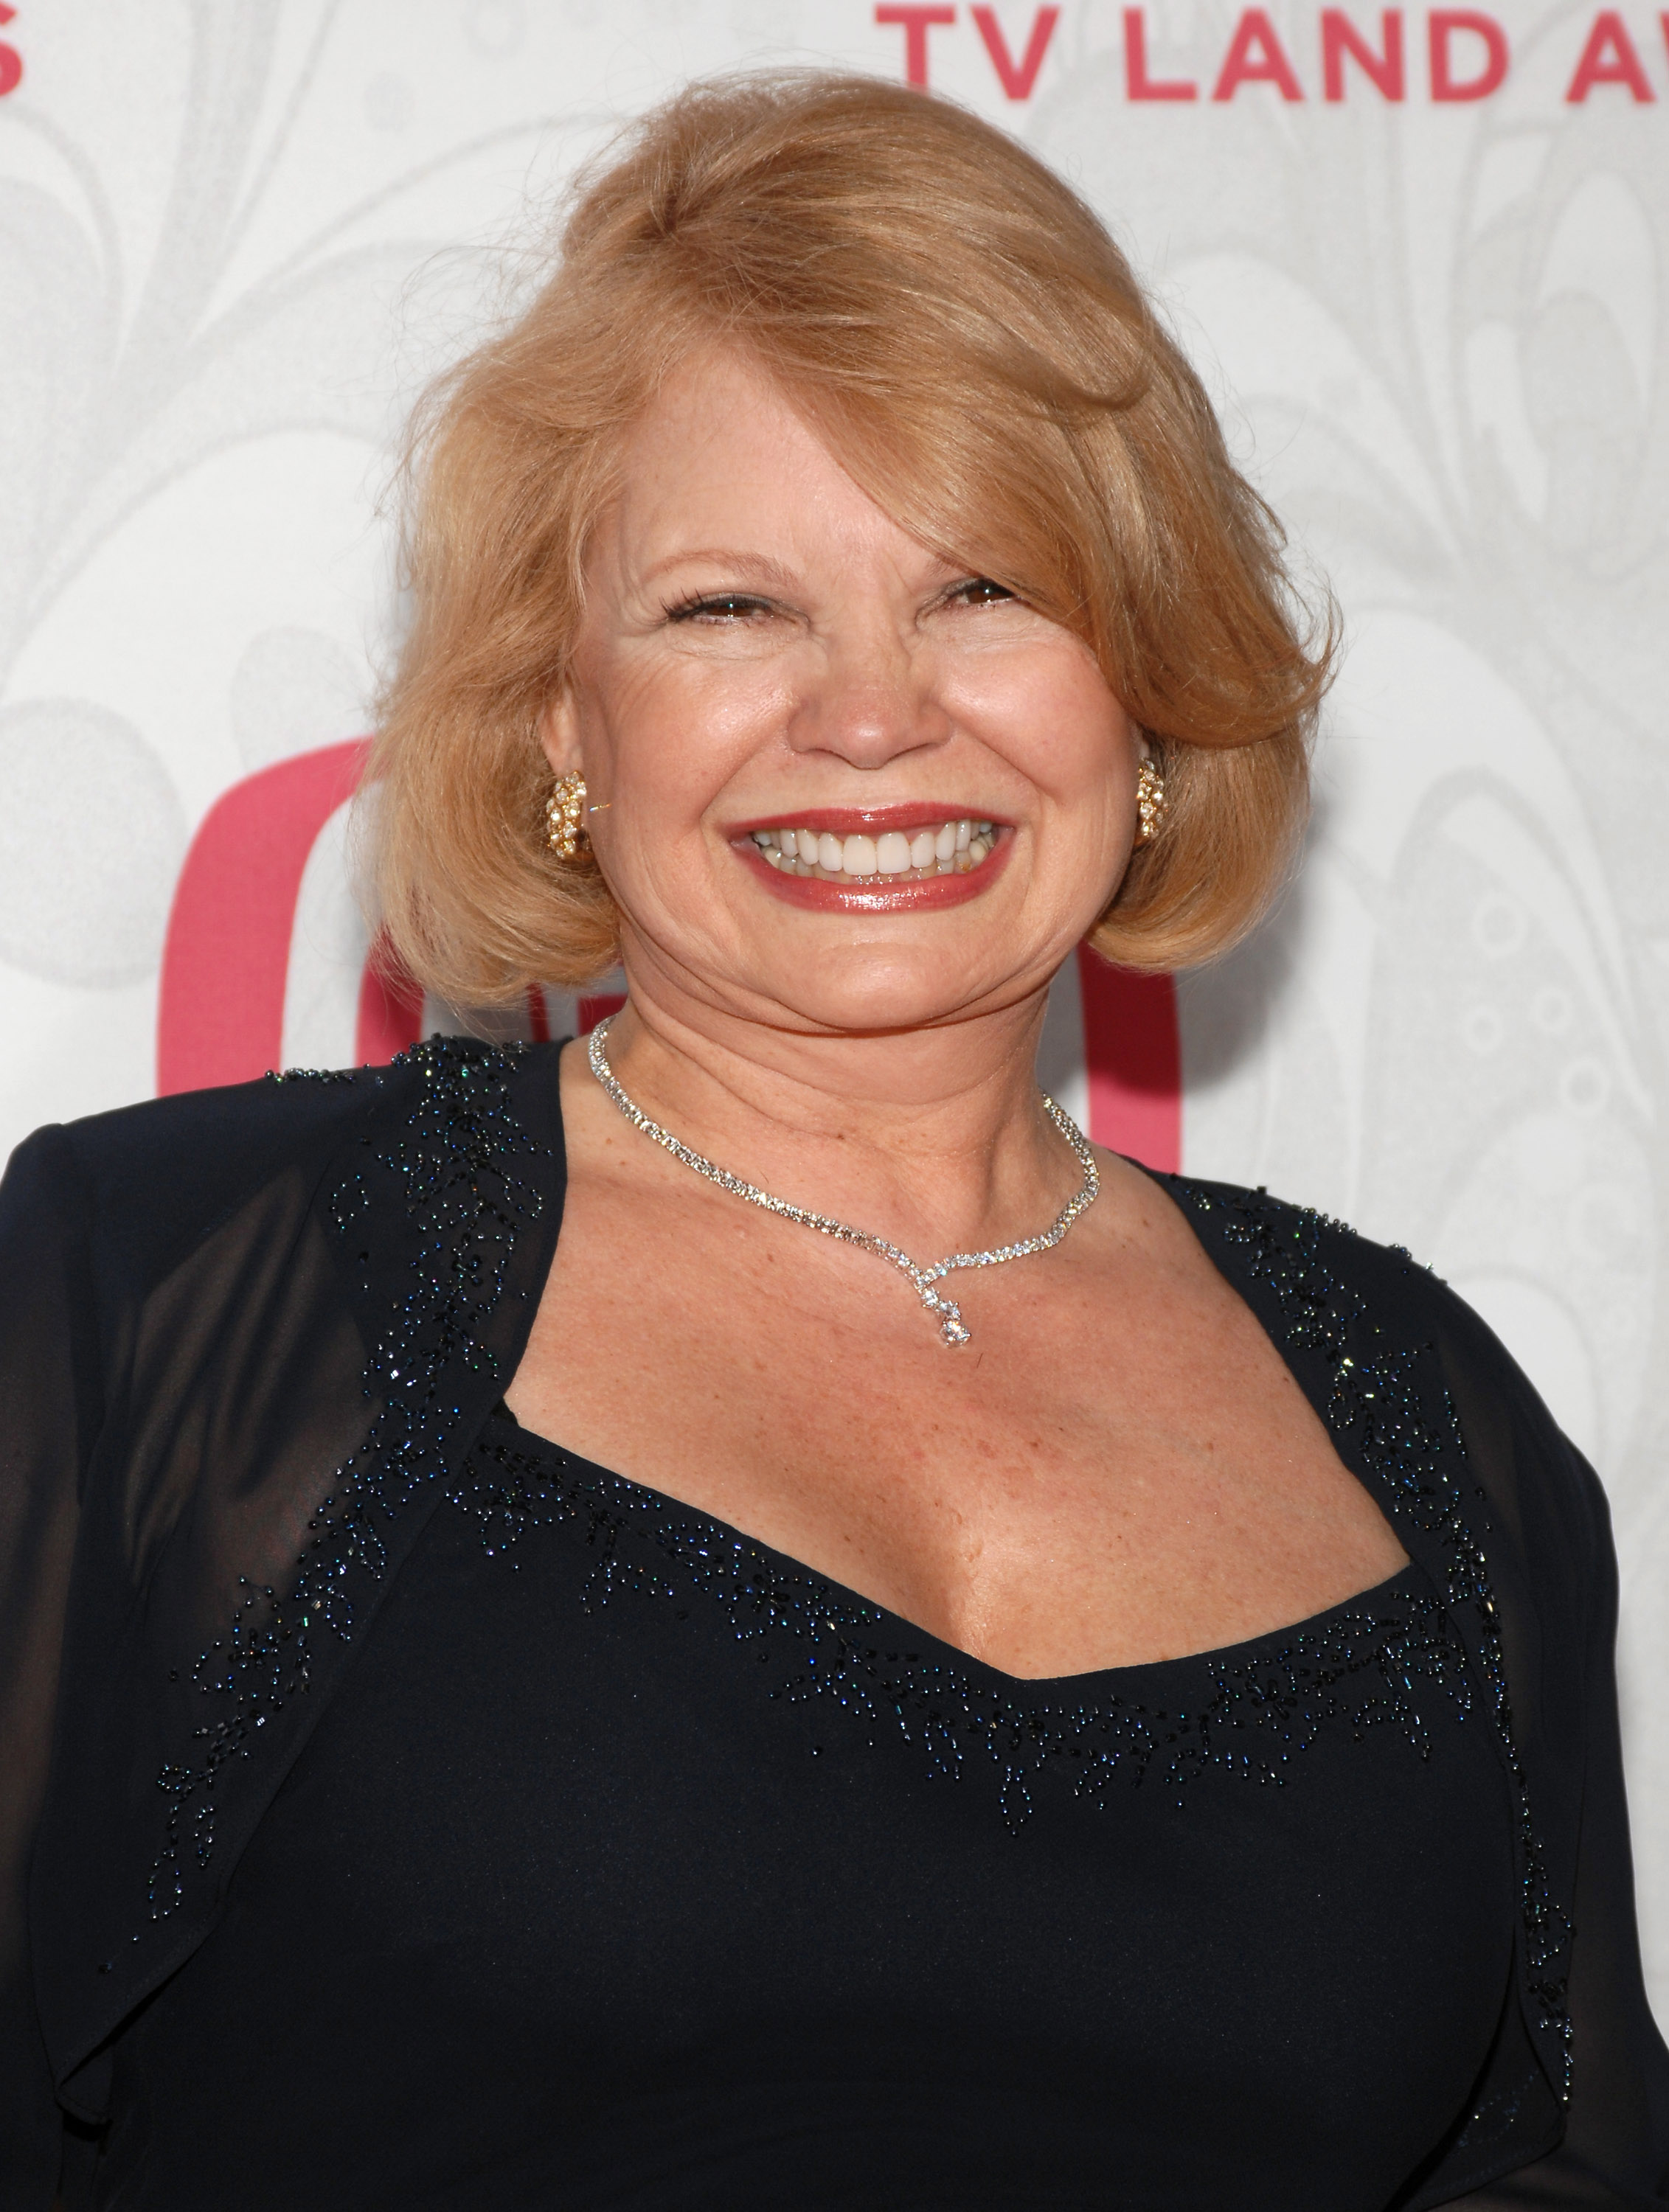 Kathy Garver during 5th Annual TV Land Awards - Arrivals at Barker Hanger in Santa Monica, CA, United States | Source: Getty Images